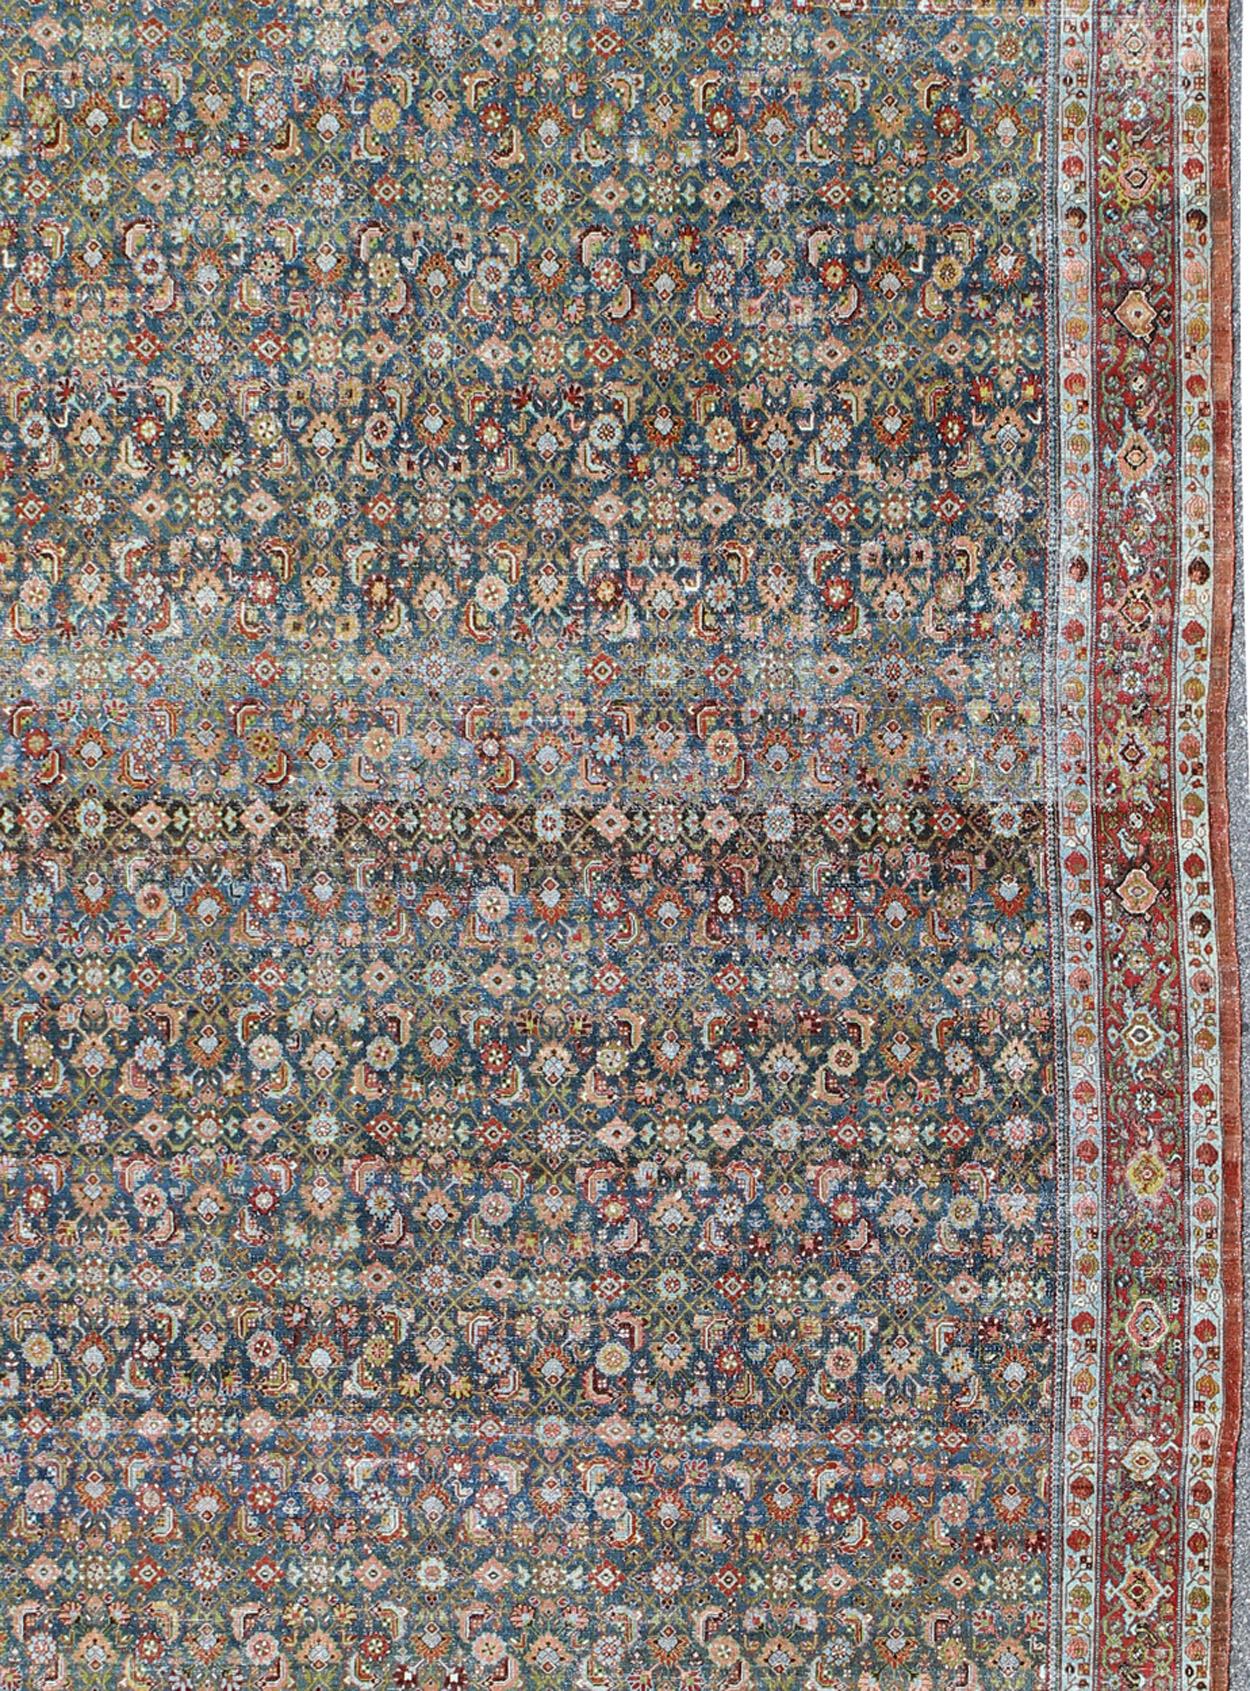 20th Century Large Antique Malayer Rug with Herati Pattern in Blue, Green, Teal and Red  For Sale